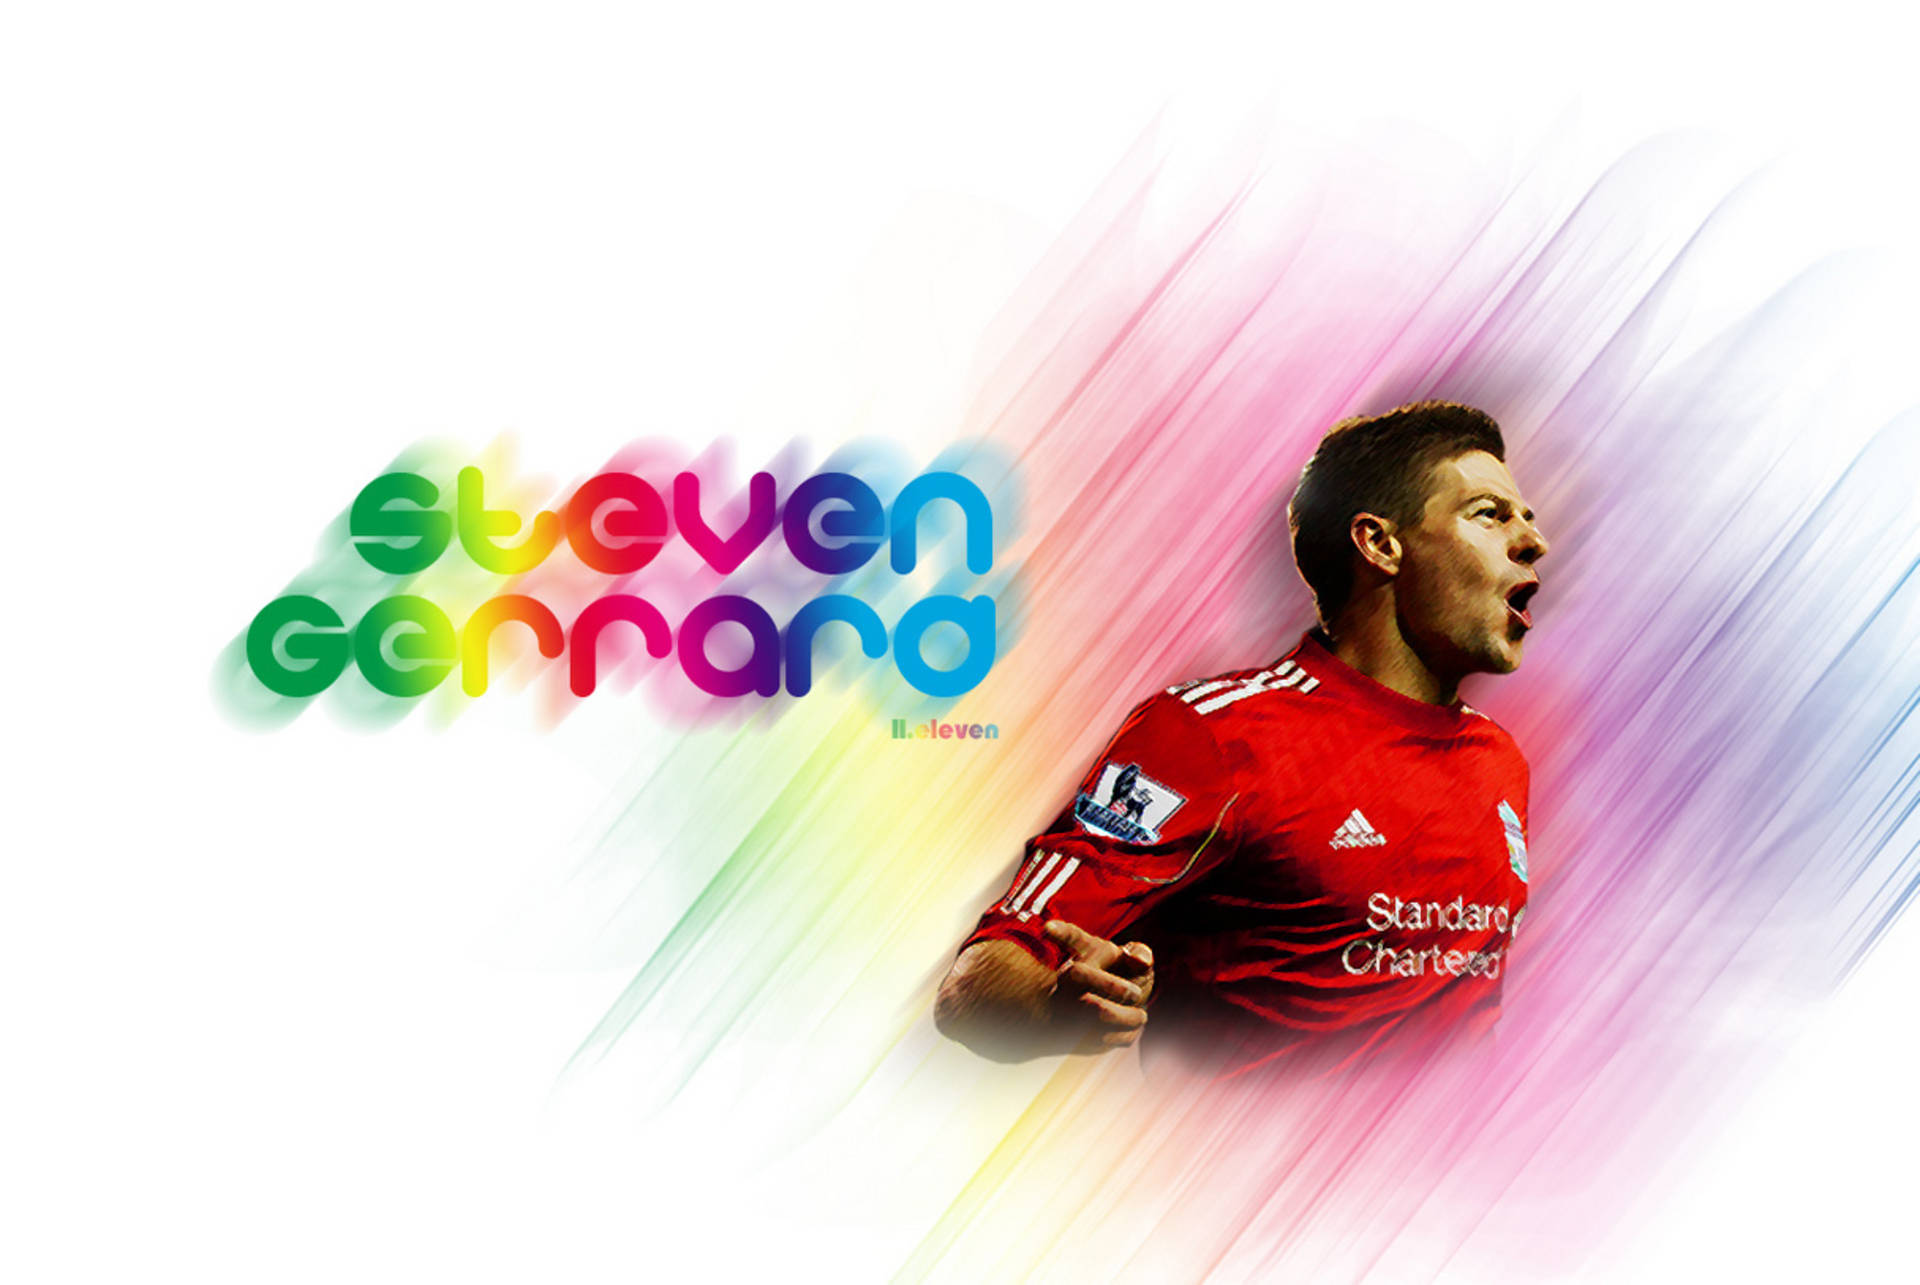 Steven Gerrard In Action On The Football Field Background